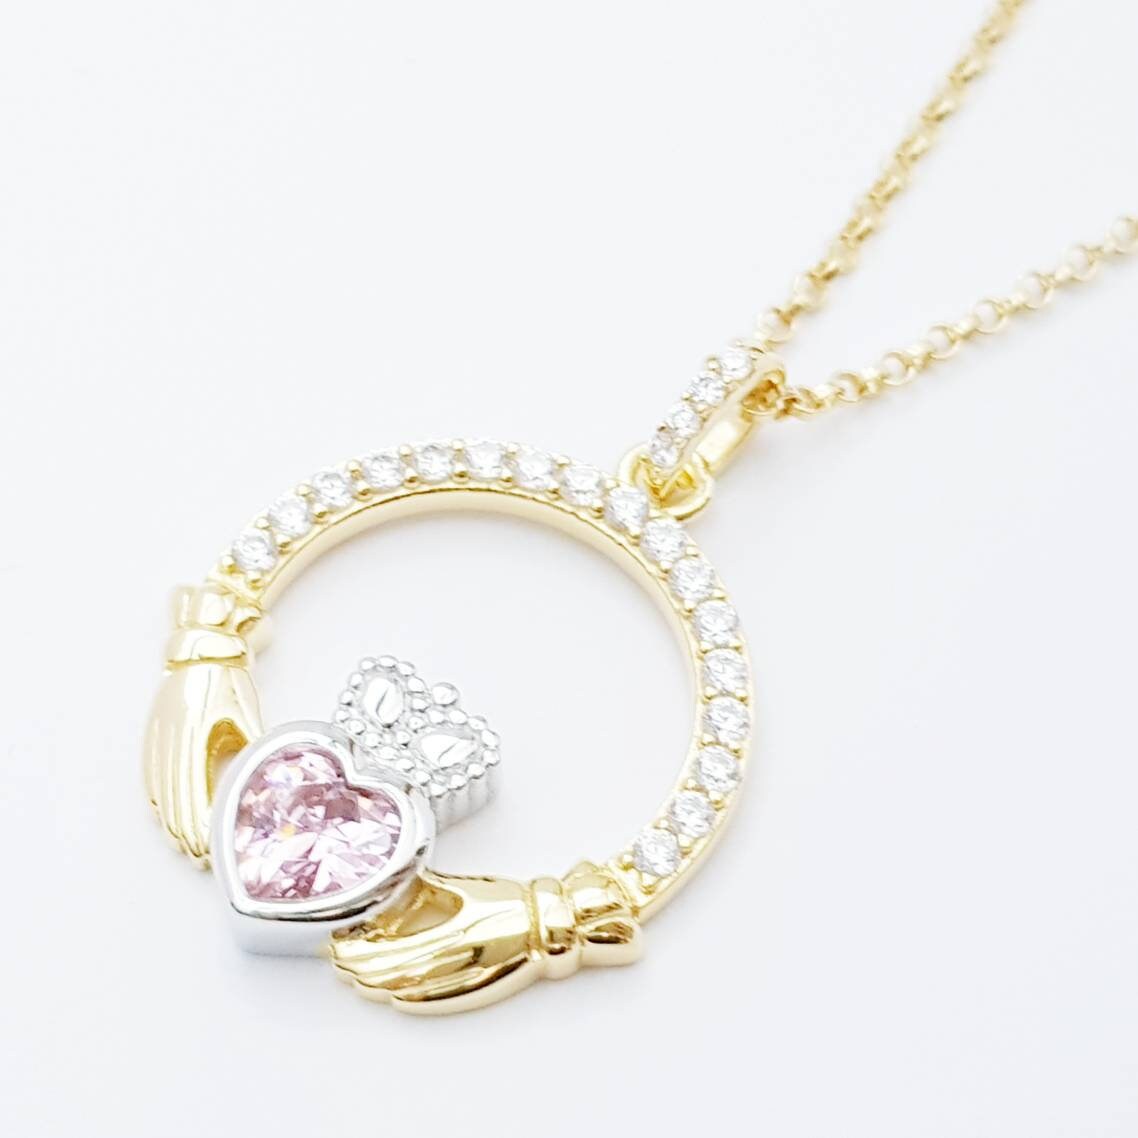 Pink Claddagh pendant, Irish claddagh necklace from Galway, Ireland, silver and gold claddagh pendant